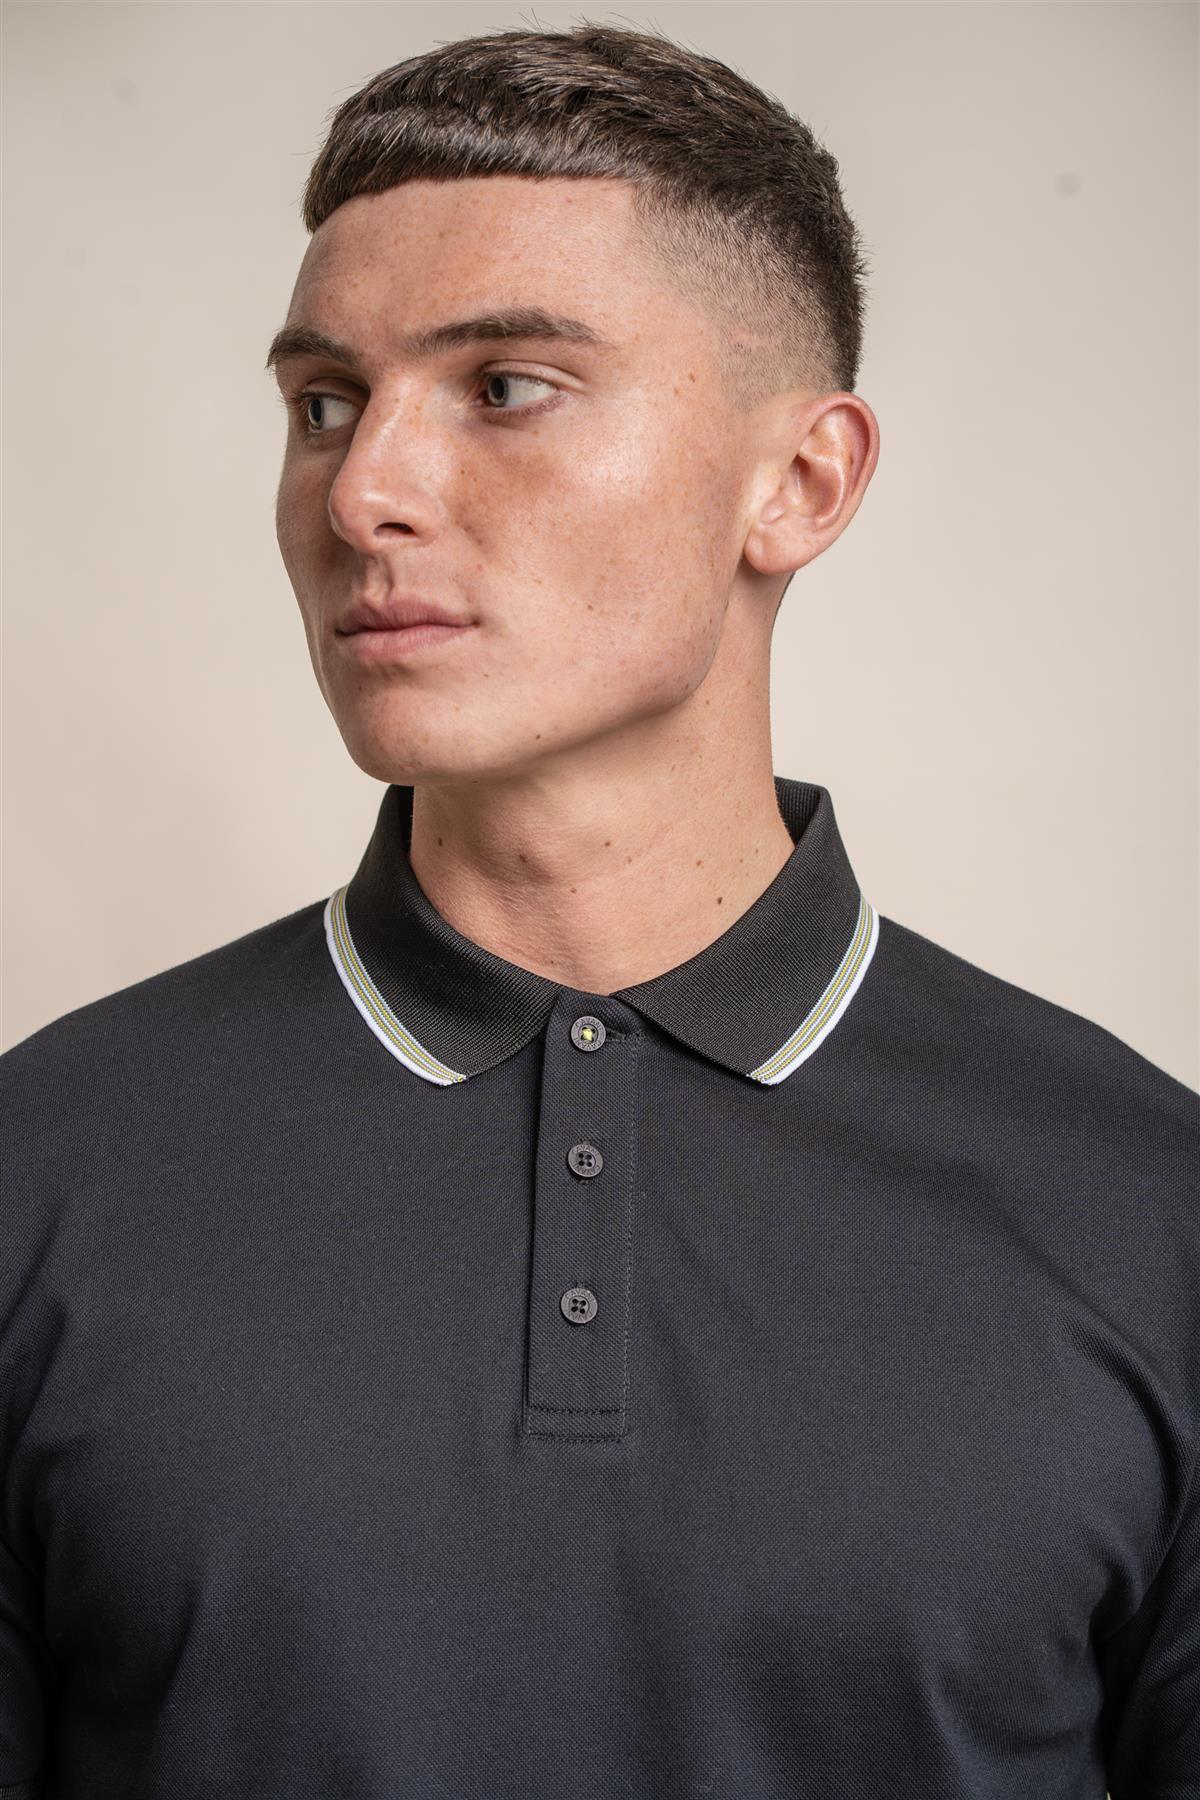 Finlay polo black T-shirt front detail